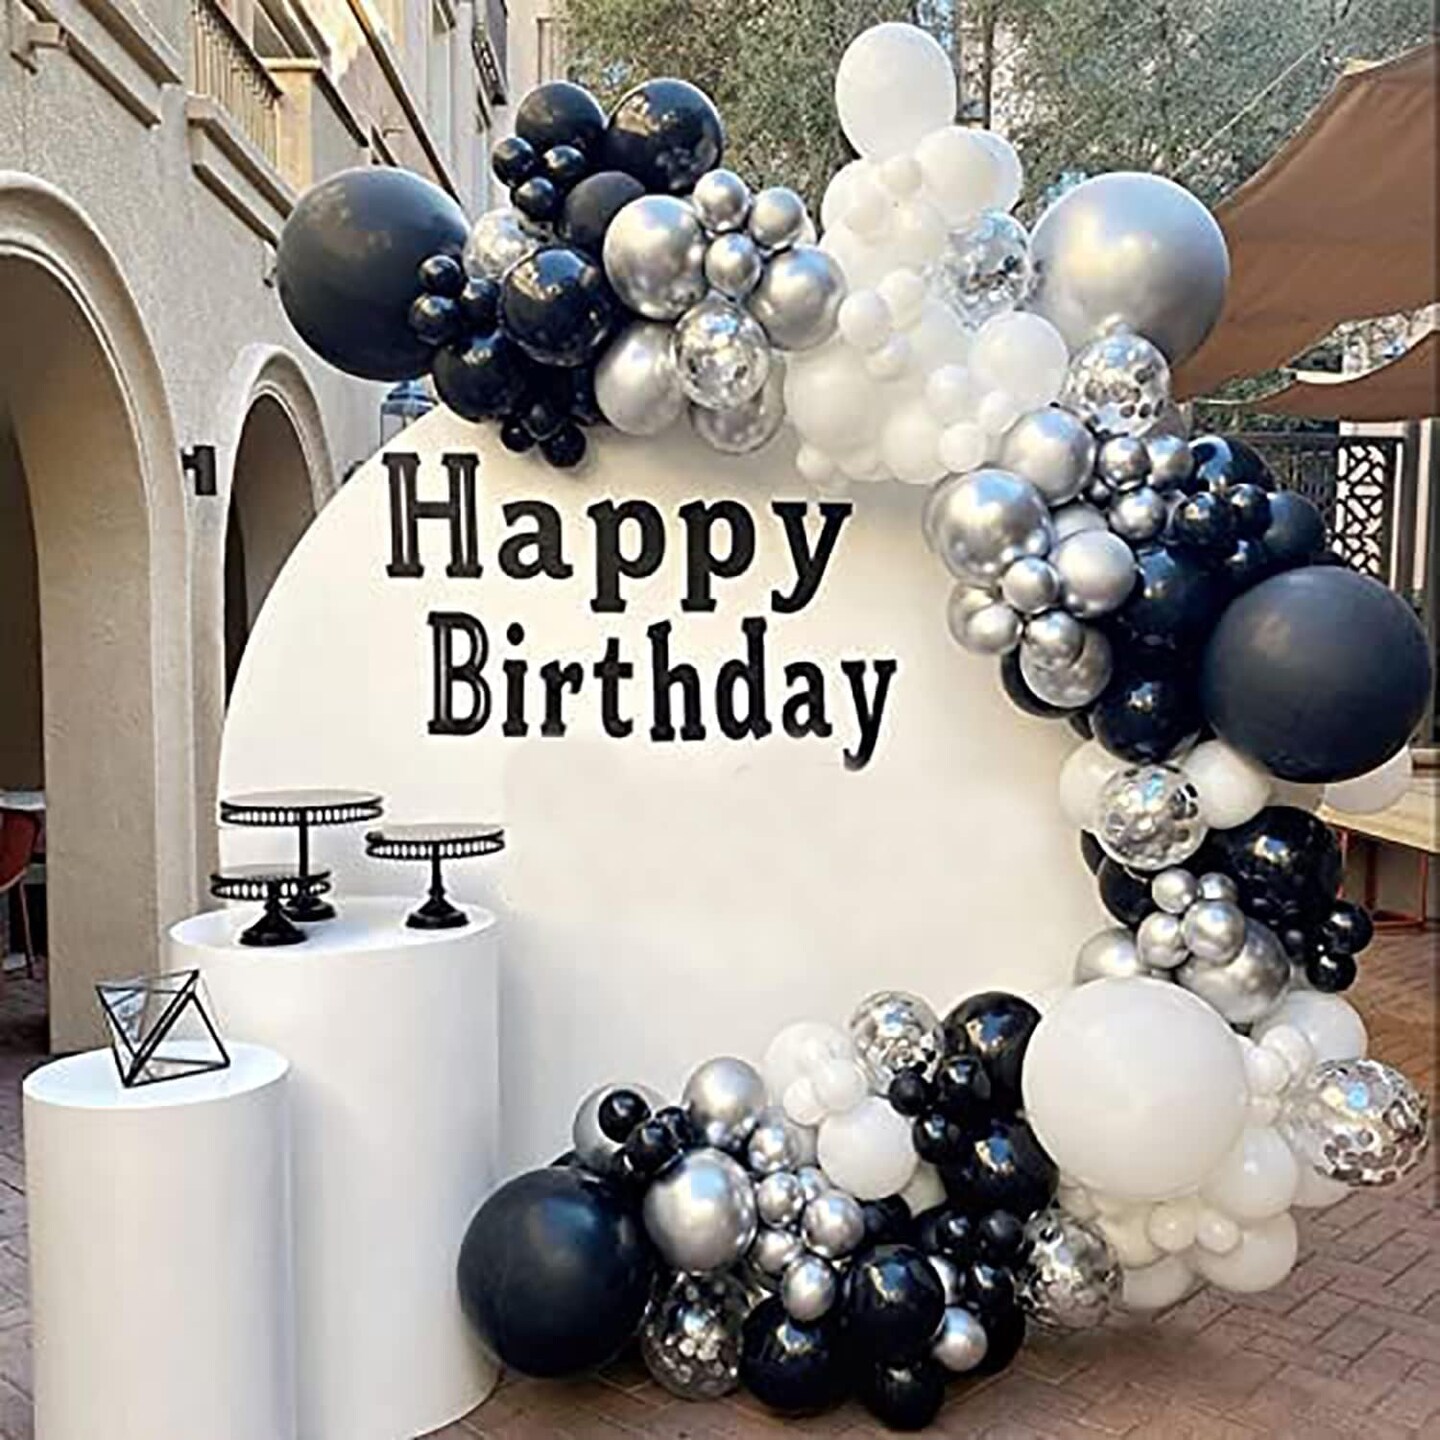 Black and Silver Balloons Garland Kit,119pcs Black White Metallic Silver and Silver Confetti Latex Balloons for Graduation Birthday Engagement Party Decorations